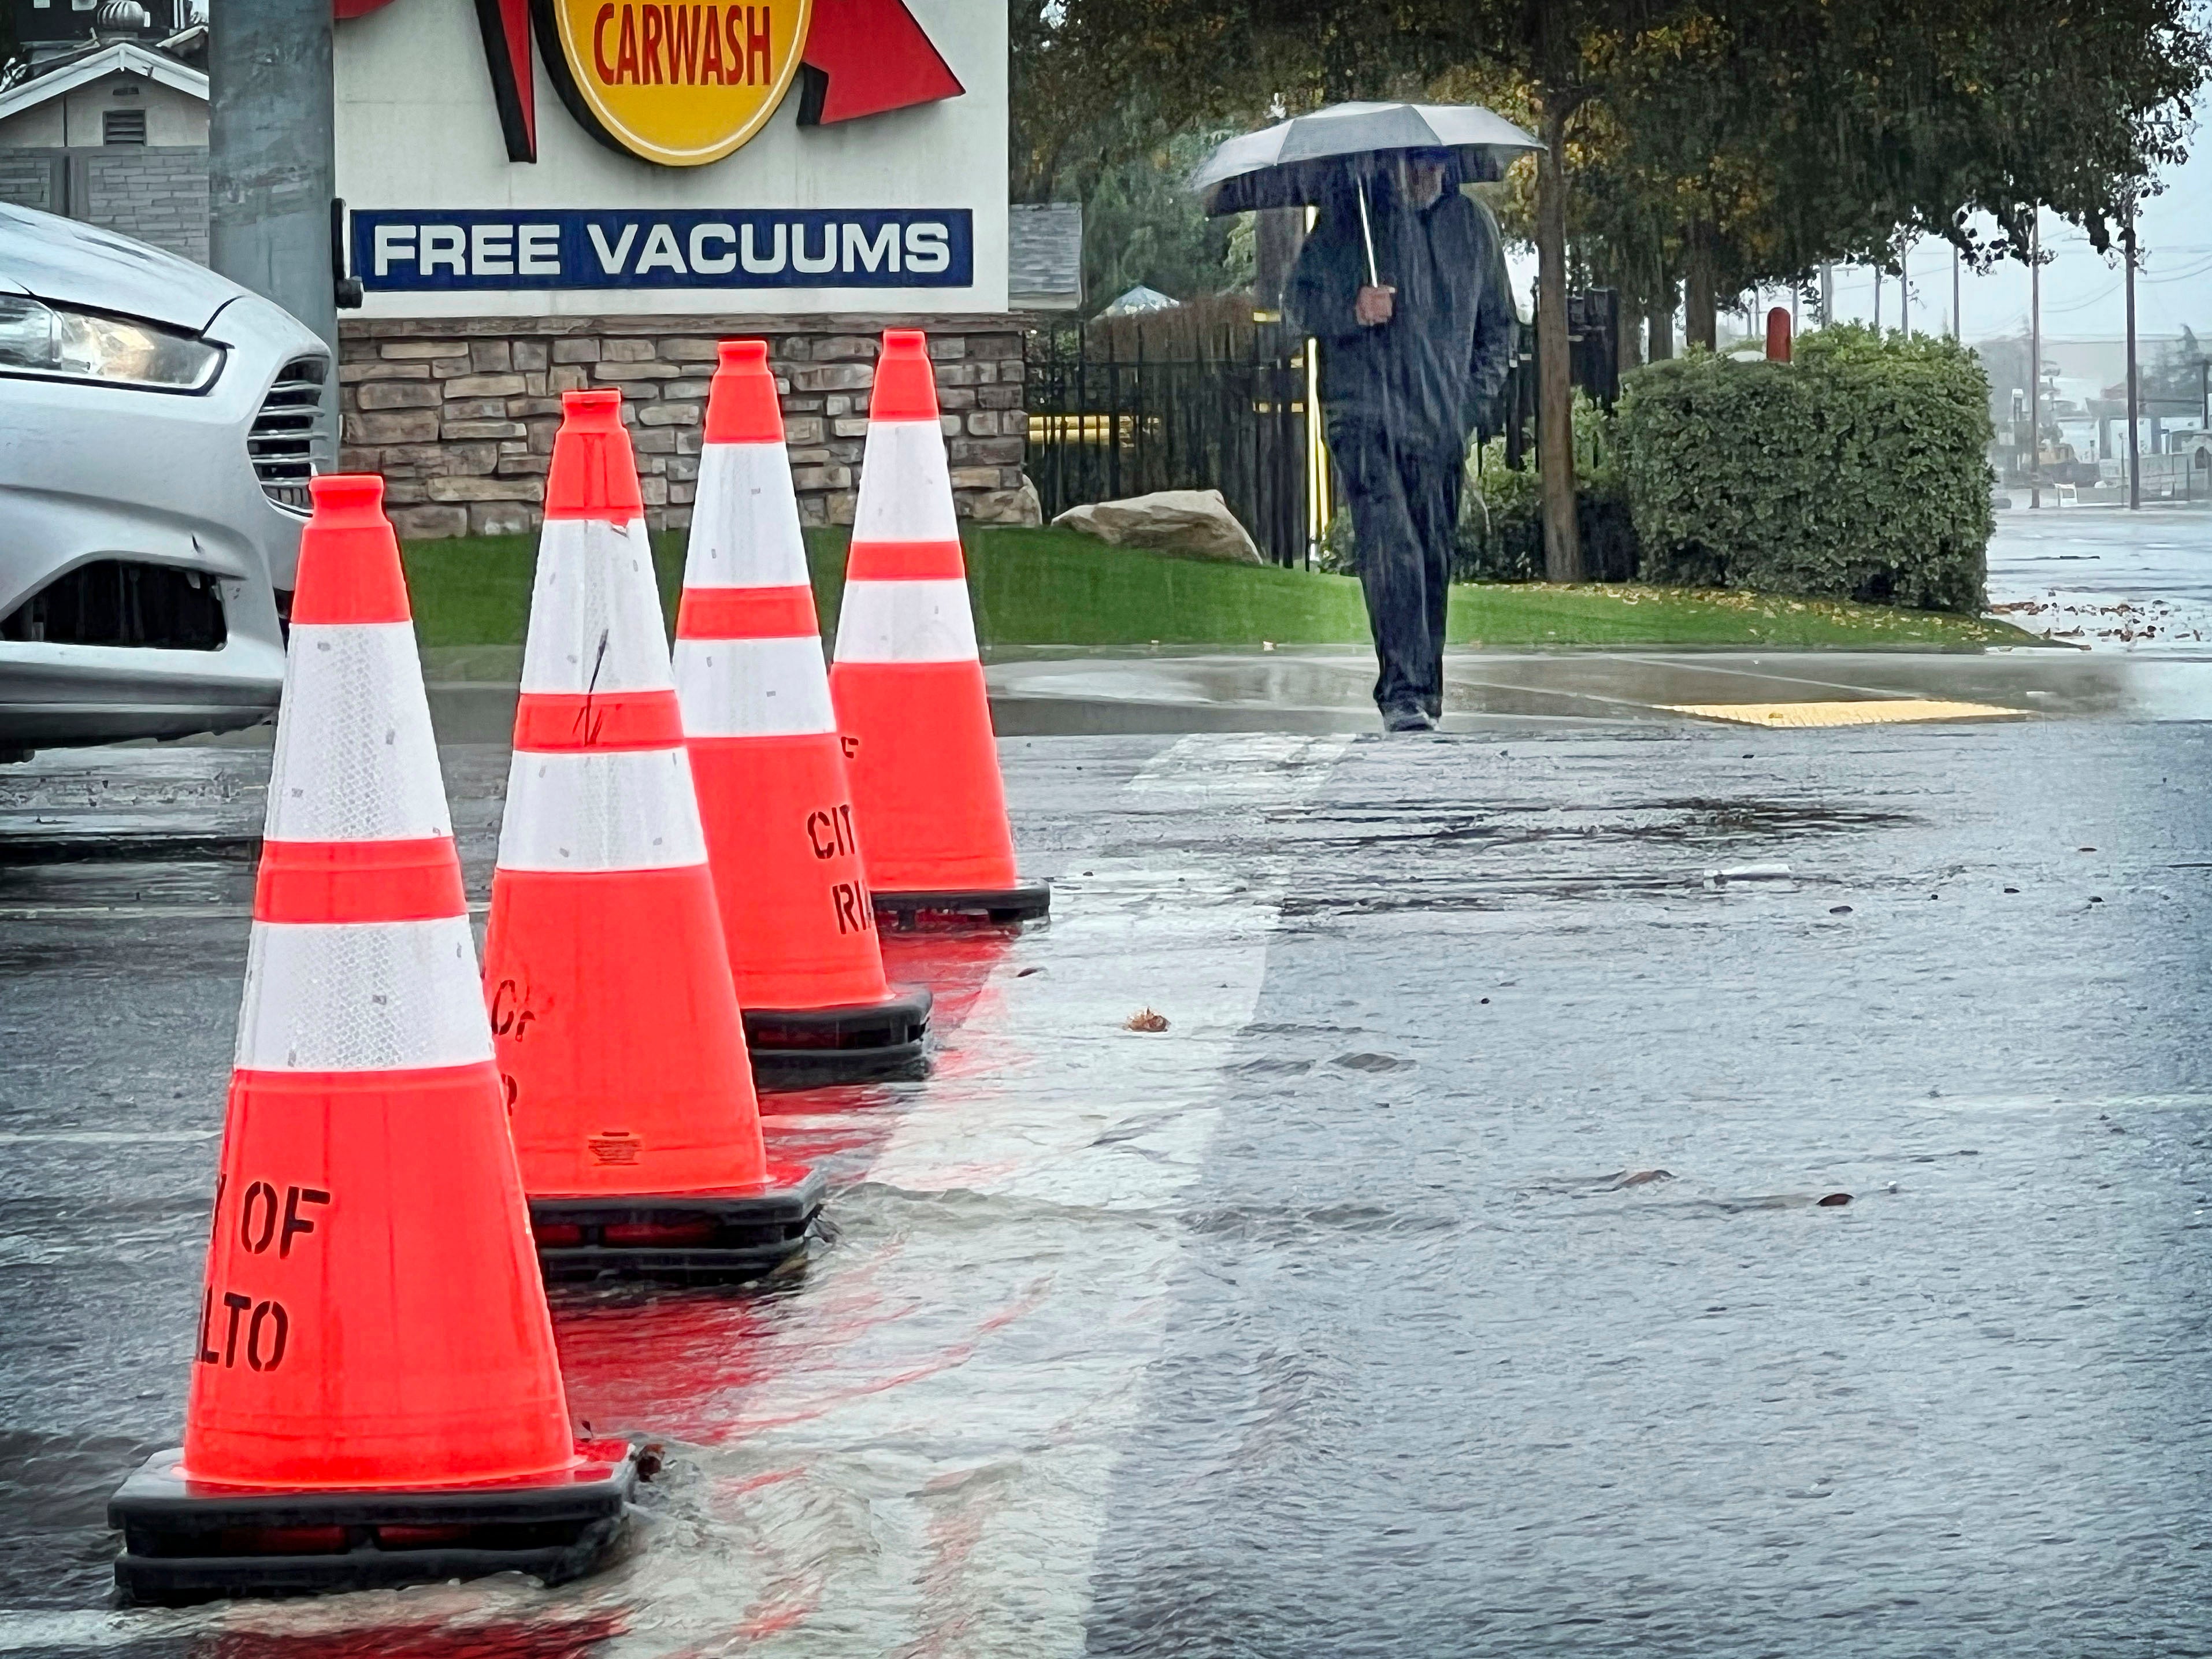 Larry Bernard Smith is protected from the rain as he crosses Foothill Blvd. on his way to get breakfast in Rialto, California